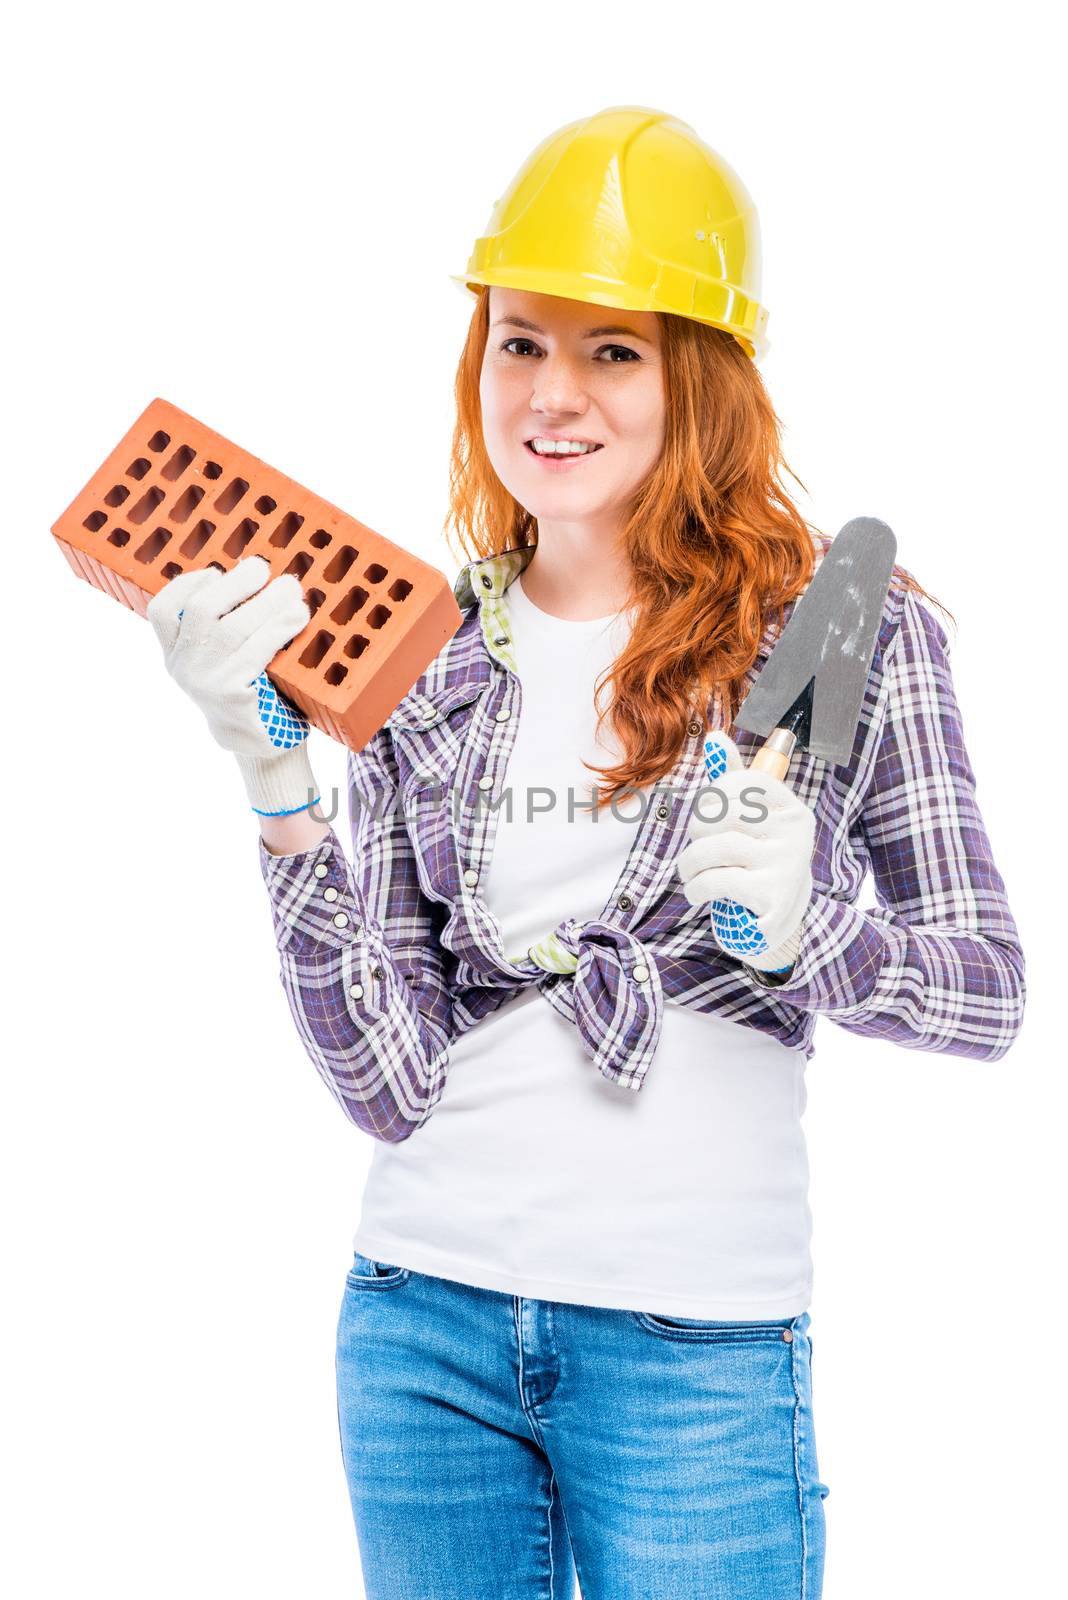 man's profession builder, portrait of woman with brick in yellow by kosmsos111